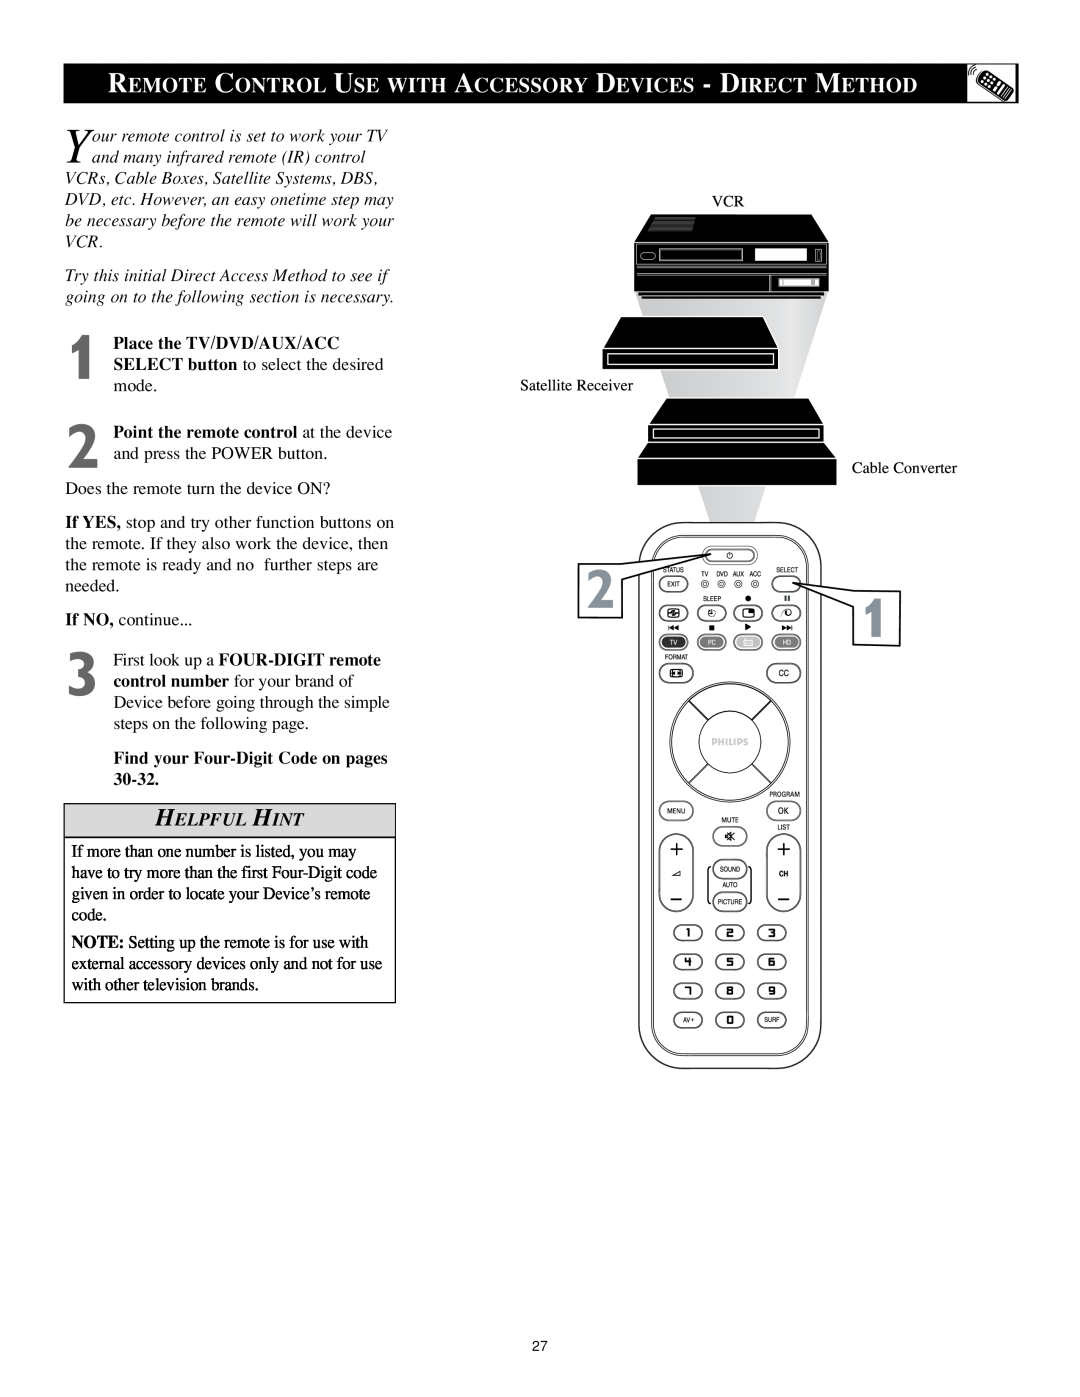 Philips 17PF9946/37 user manual Helpful Hint, Place the TV/DVD/AUX/ACC, Find your Four-DigitCode on pages 